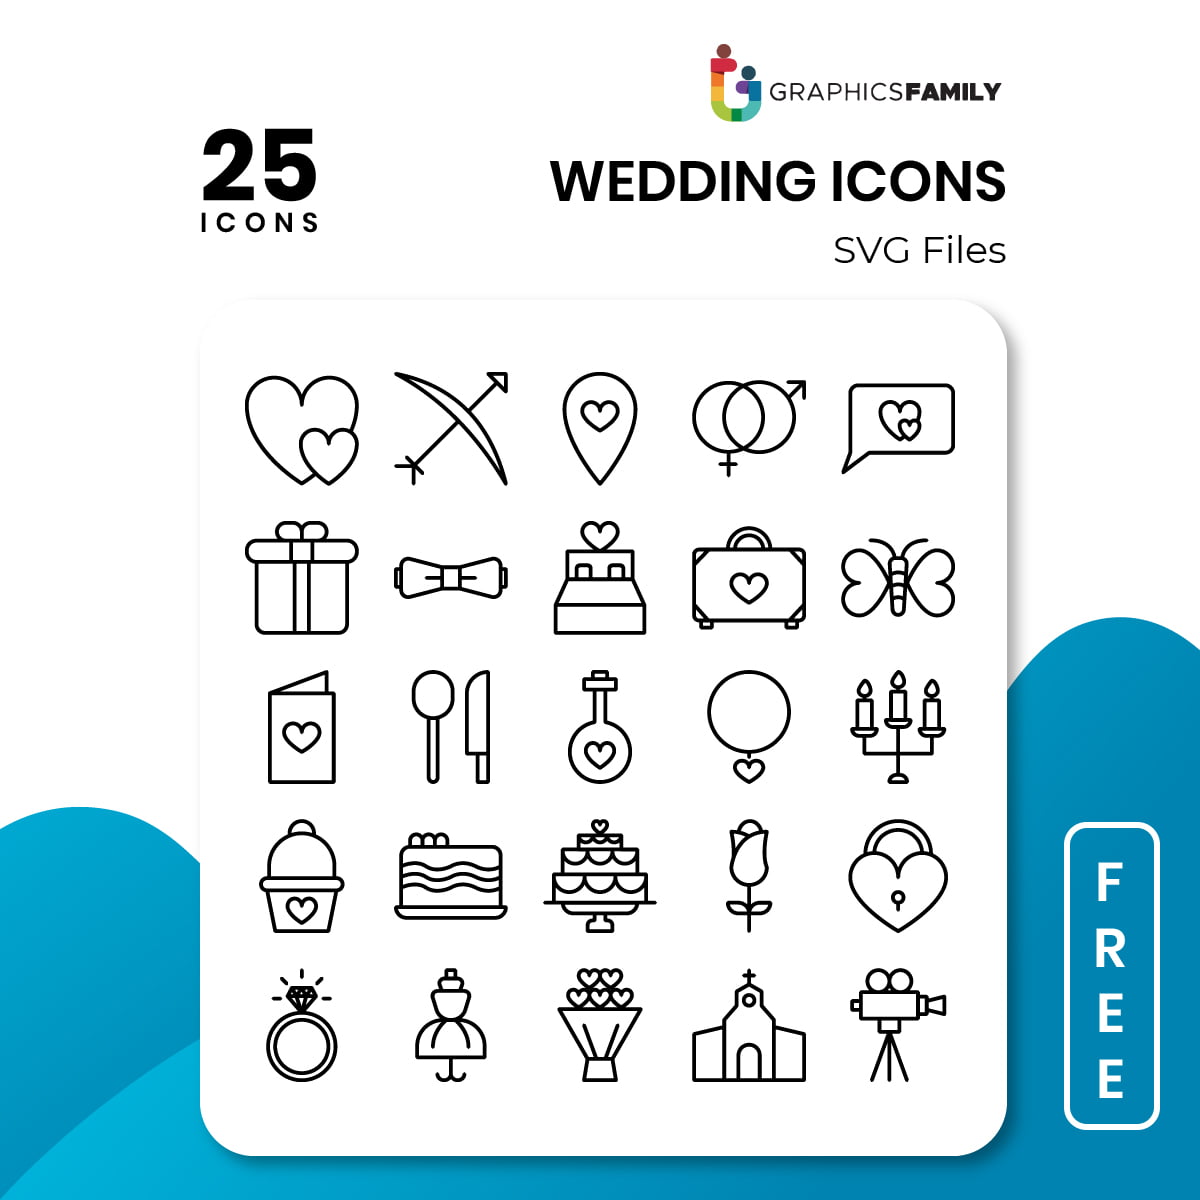 Download Free Wedding Icons Graphicsfamily